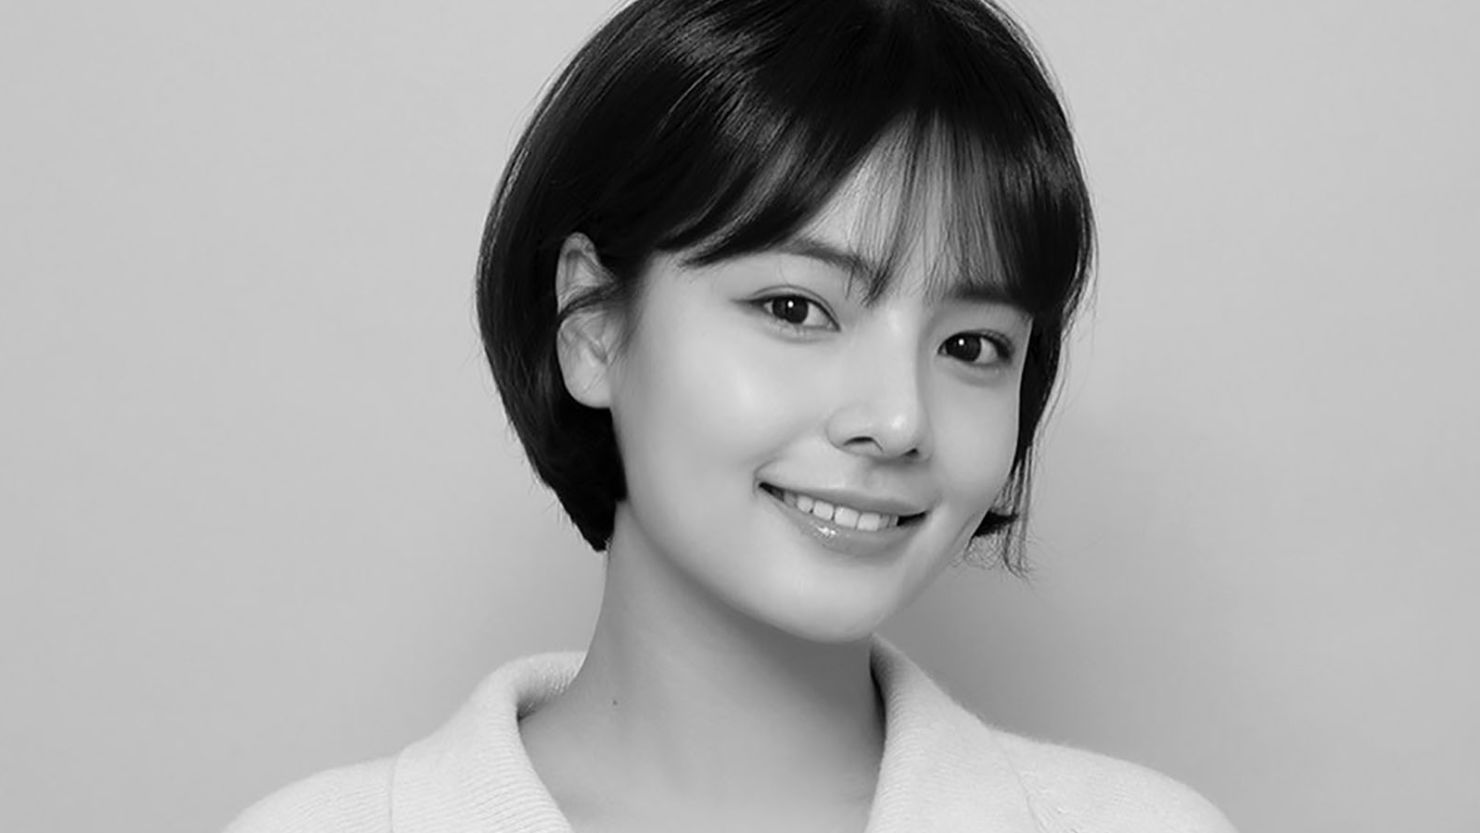 Song Yoo-jung's death was confirmed by her agency.